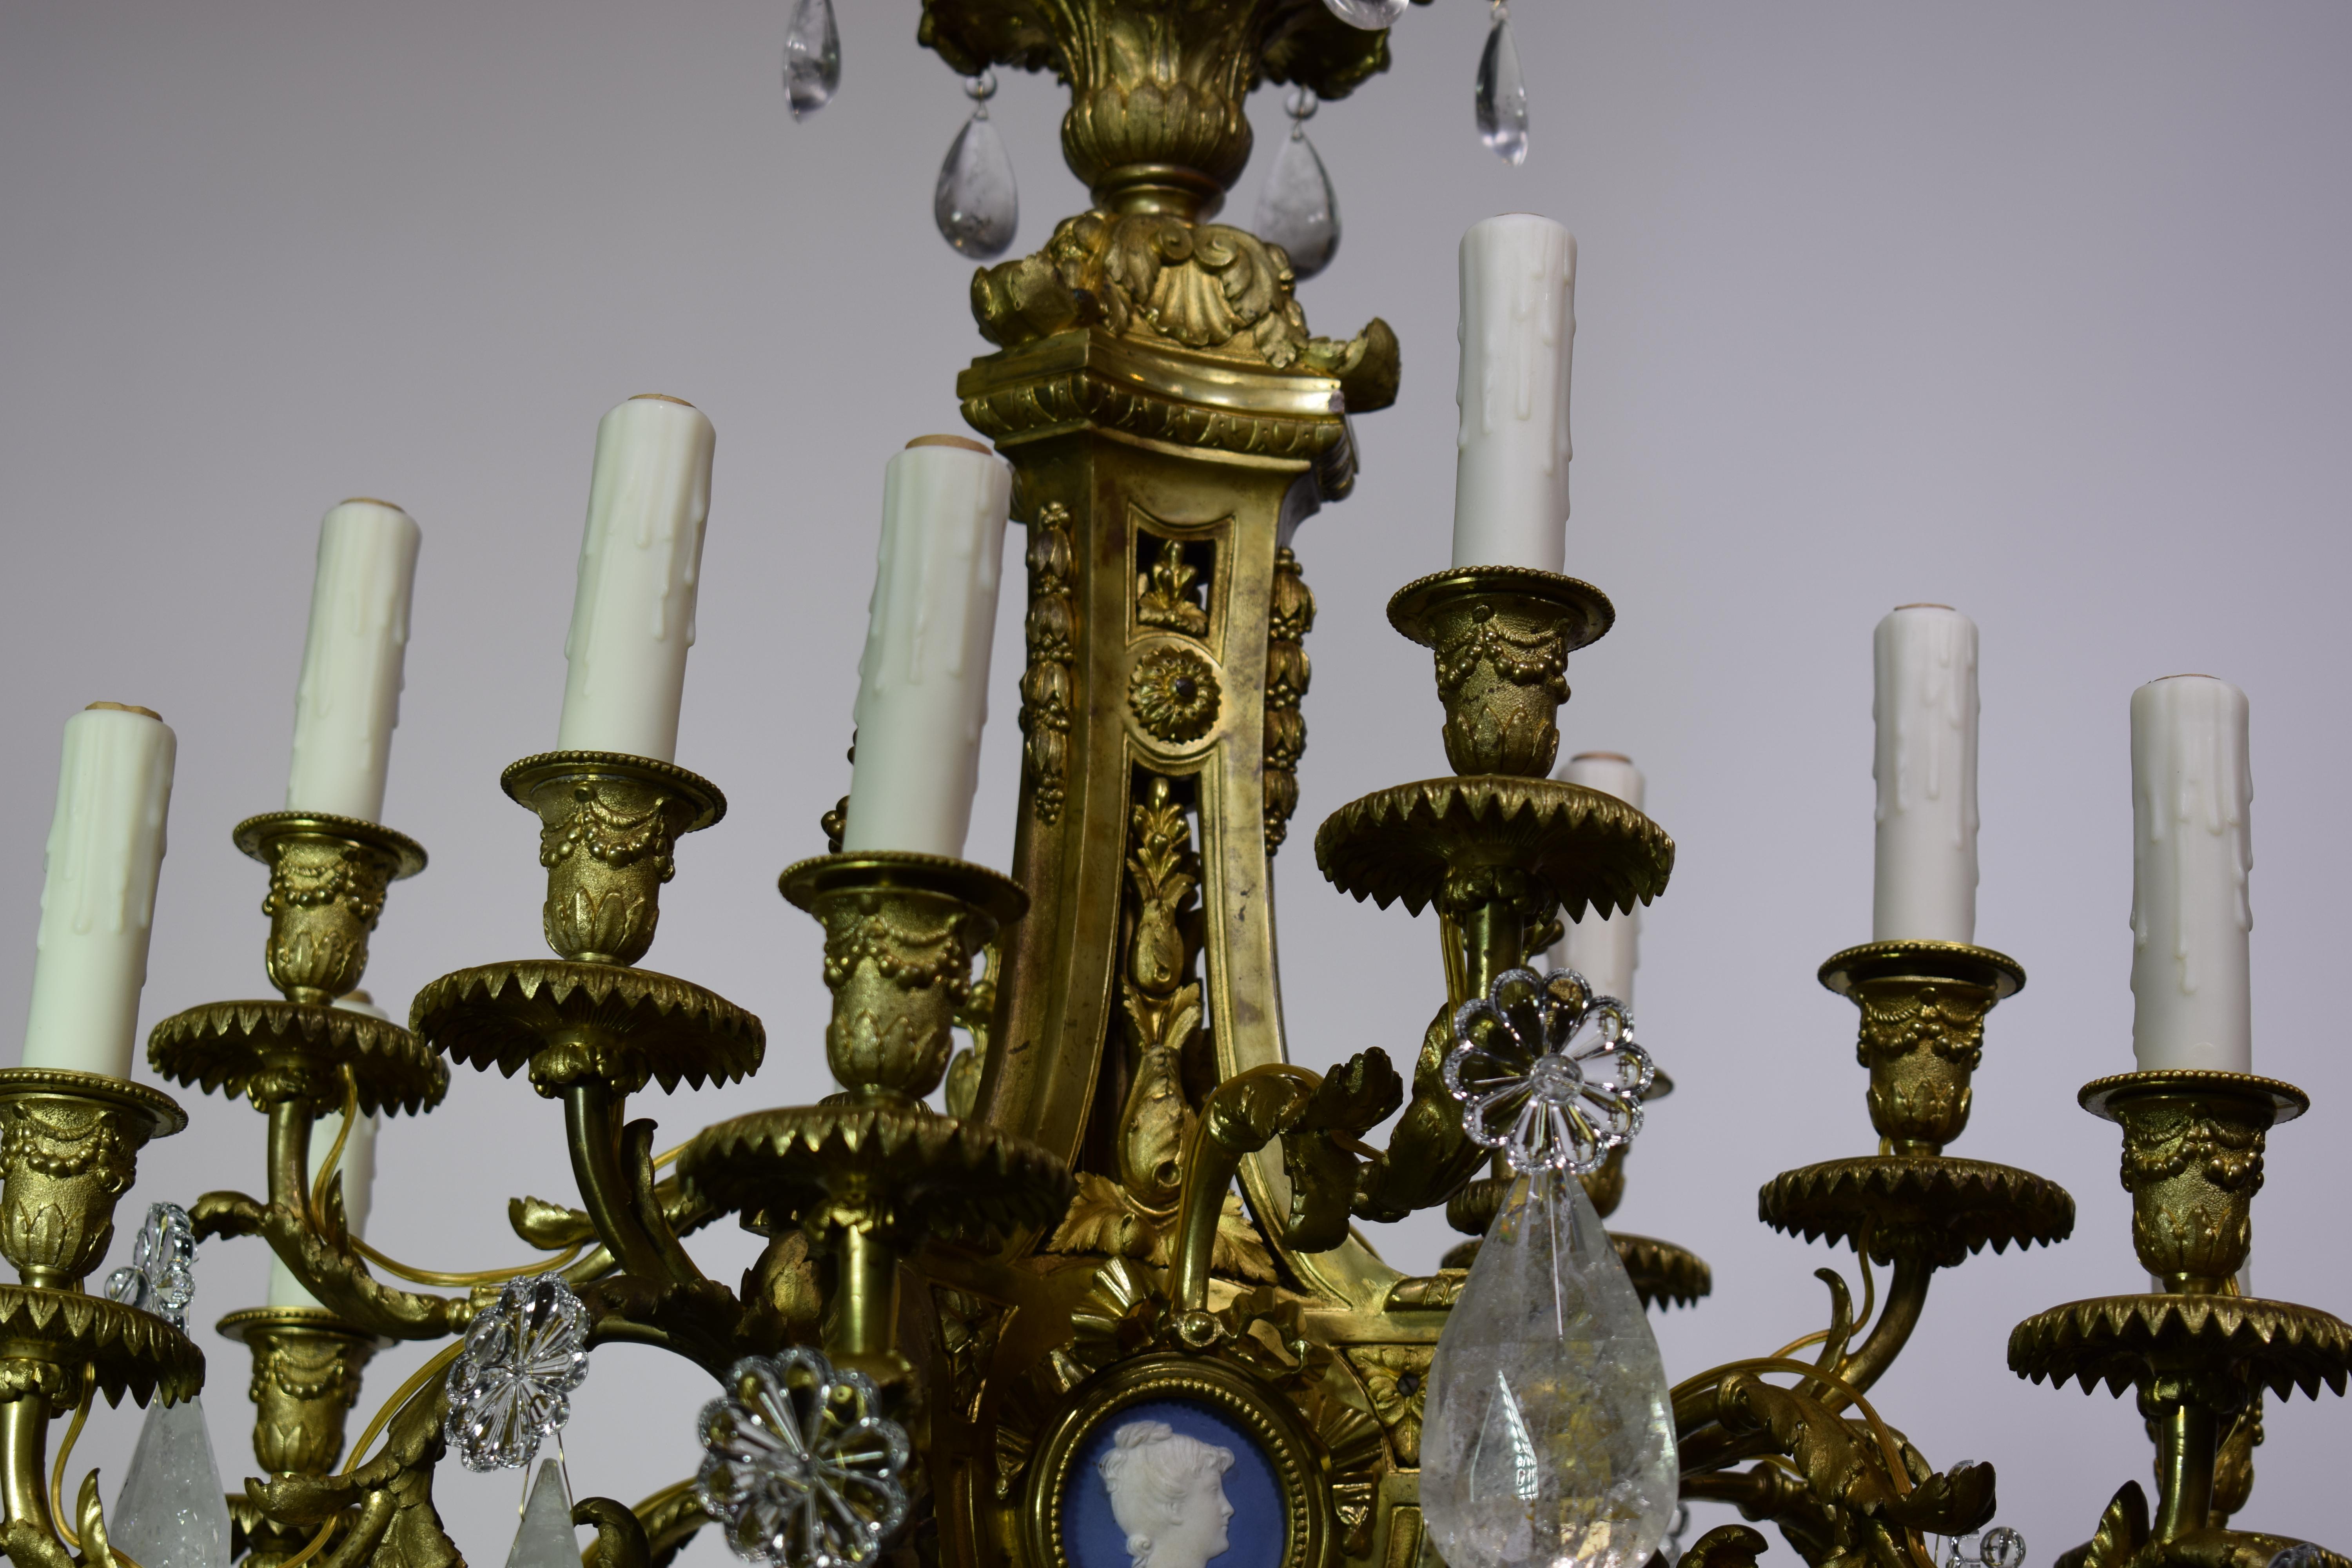 A magnificent gilt-bronze, crystal and rock crystal, Louis XVI style chandelier, featuring round reserves fitted with round blue and white bisque cameos. This chandelier was originally used for candles, now electrified. France, circa 1880. 12